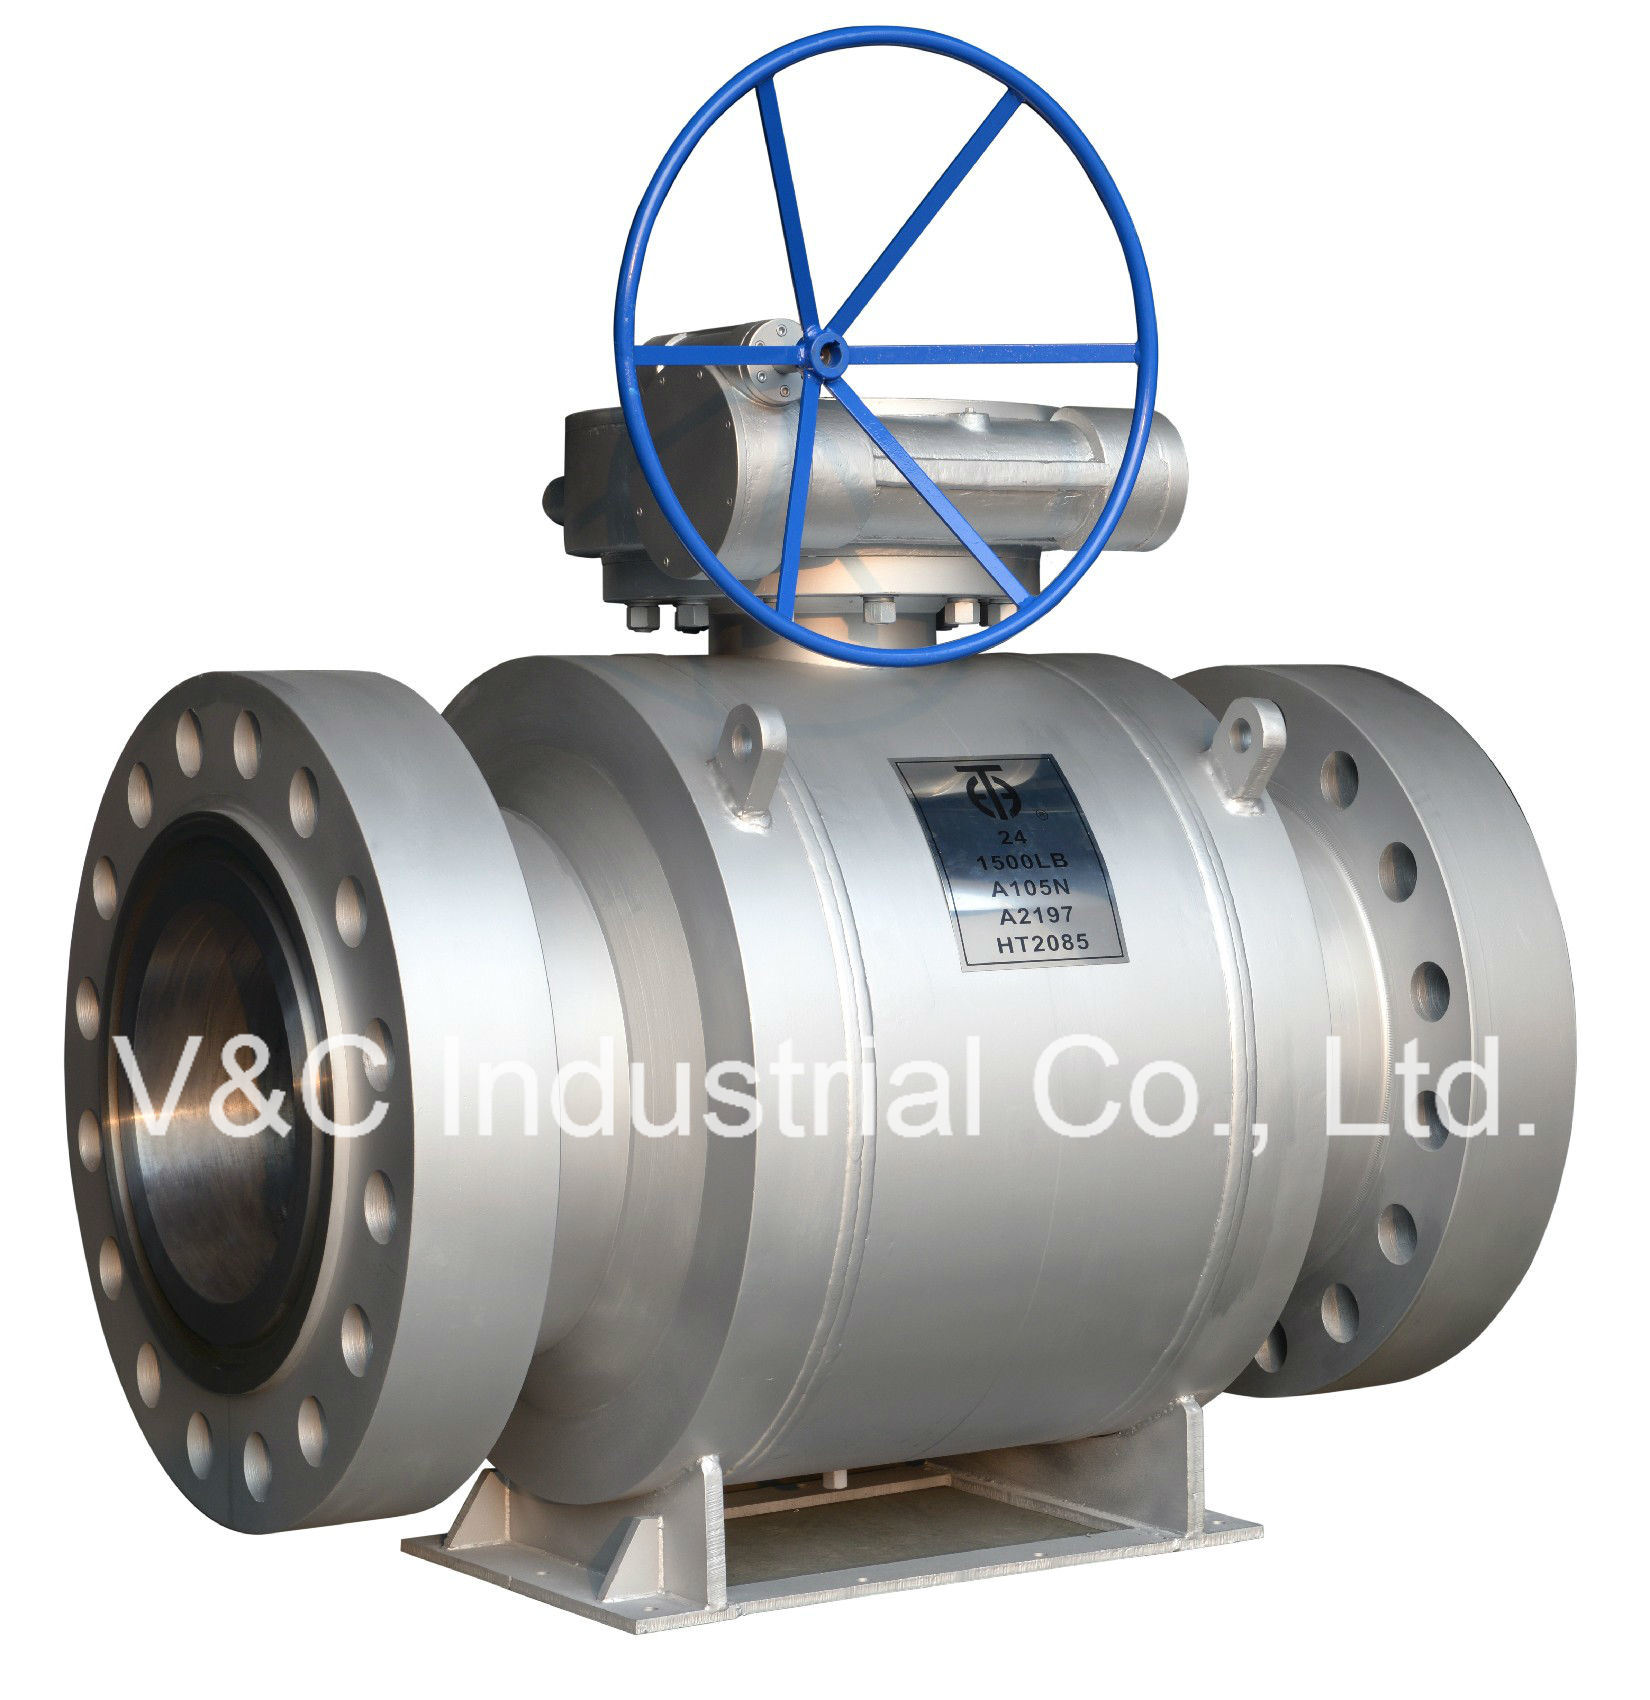 Stainless Steel Trunnion Mounted Ball Valve with Flange End